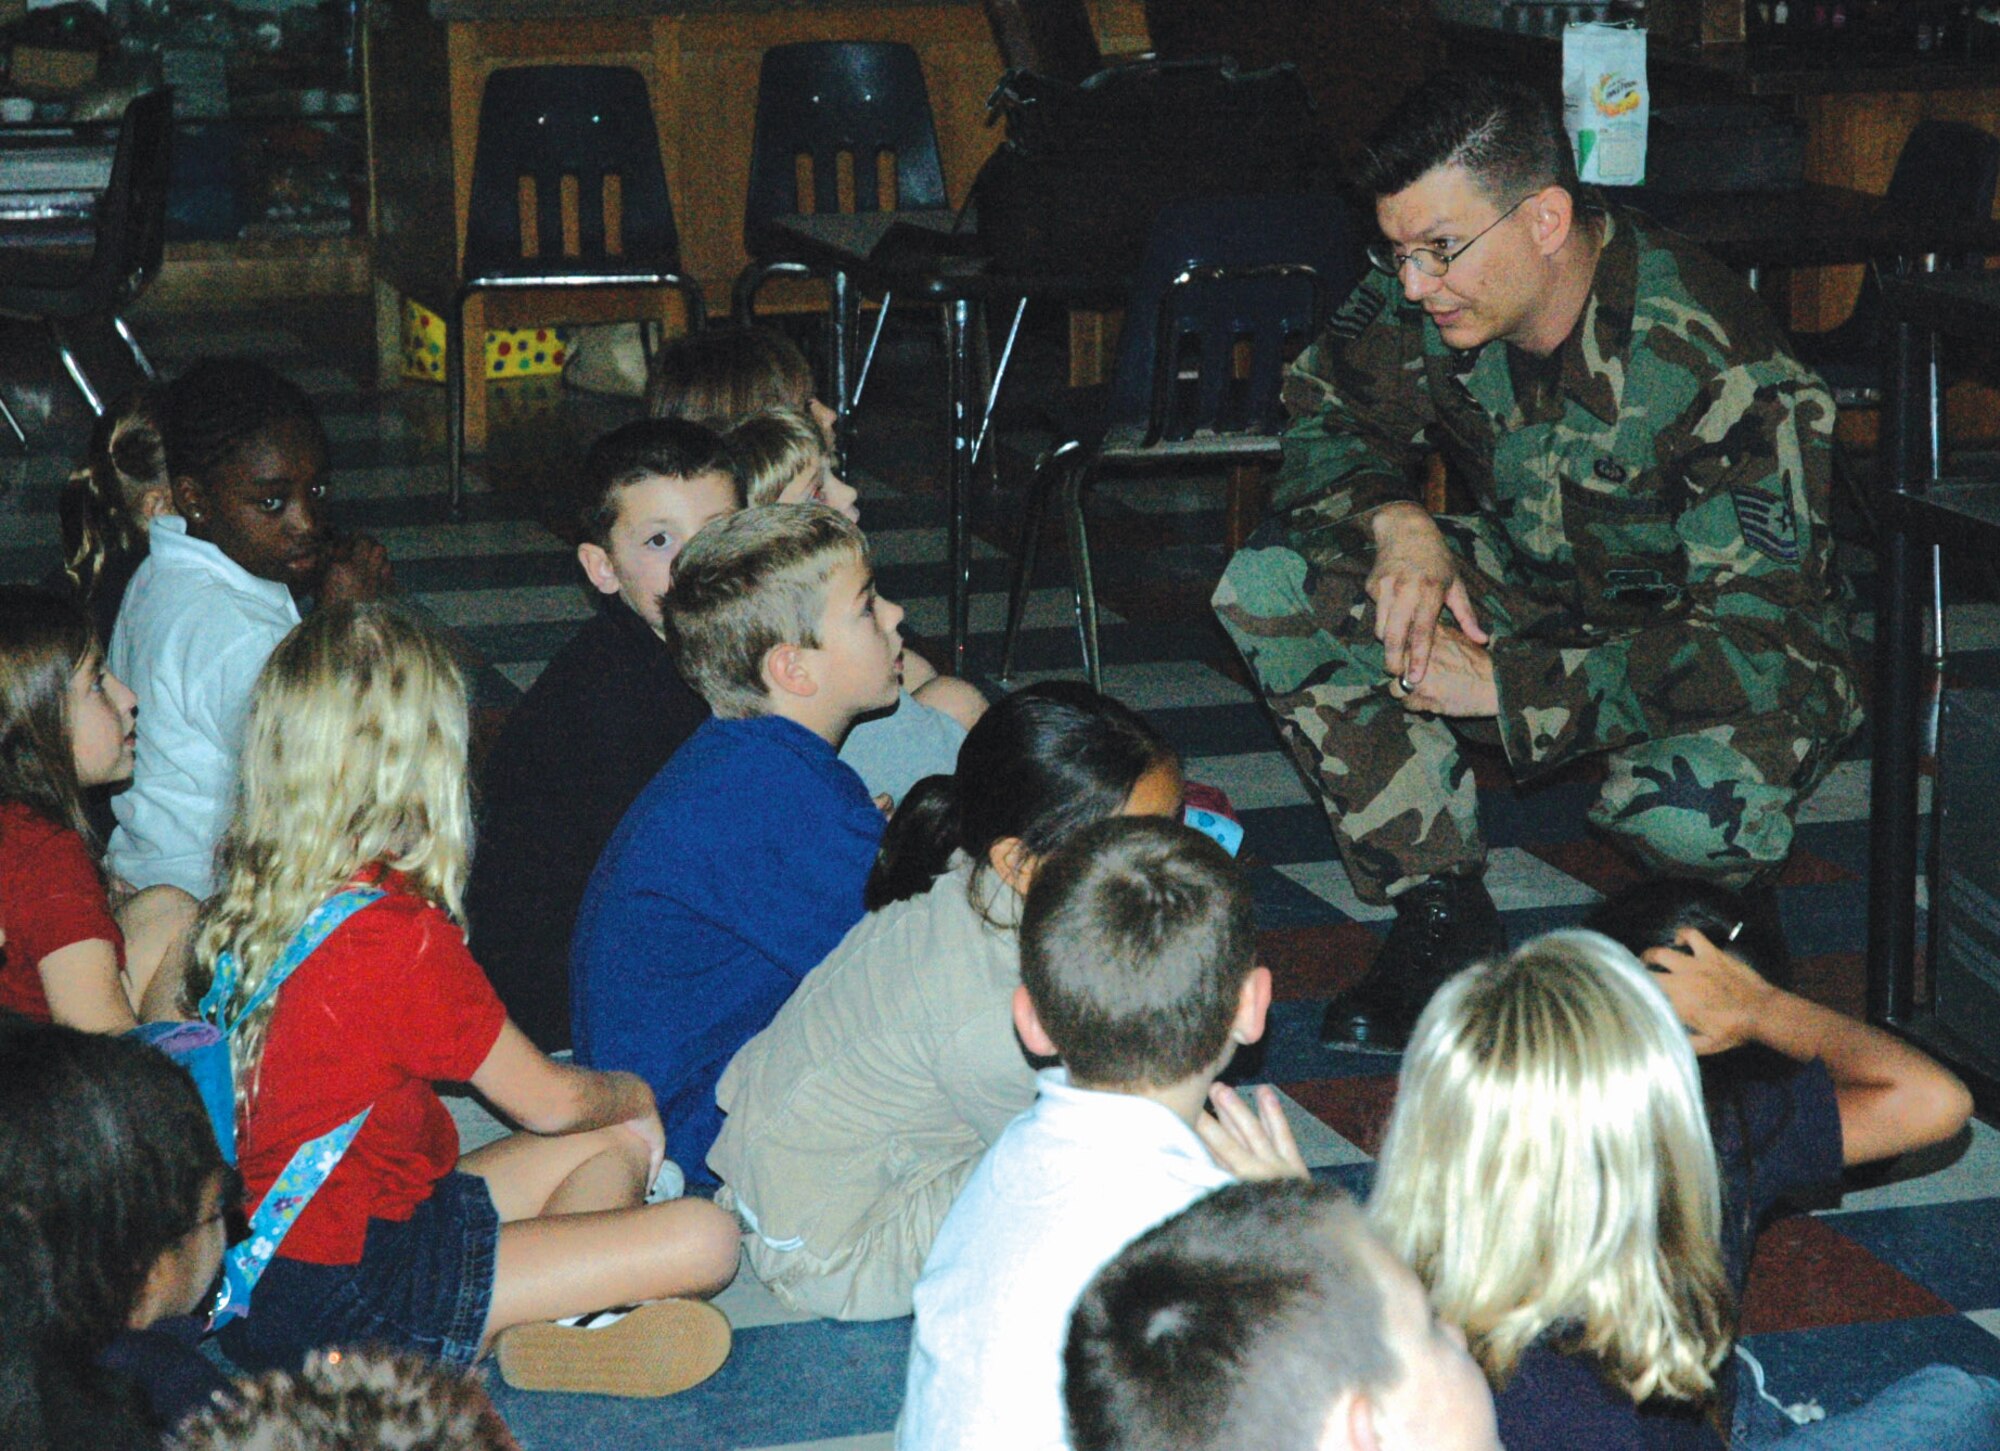 Tech. Sgt. Publio Casillas answers individual students' questions after his presentation on weather Sept. 28 at Tyndall Elementary School in Florida. Sergeant Casillas is the NCO in charge of the 325th Operations Support Squadron Weather Flight mission services element at Tyndall Air Force Base, Fla. (U.S. Air Force photo/Chrissy Cuttita) 